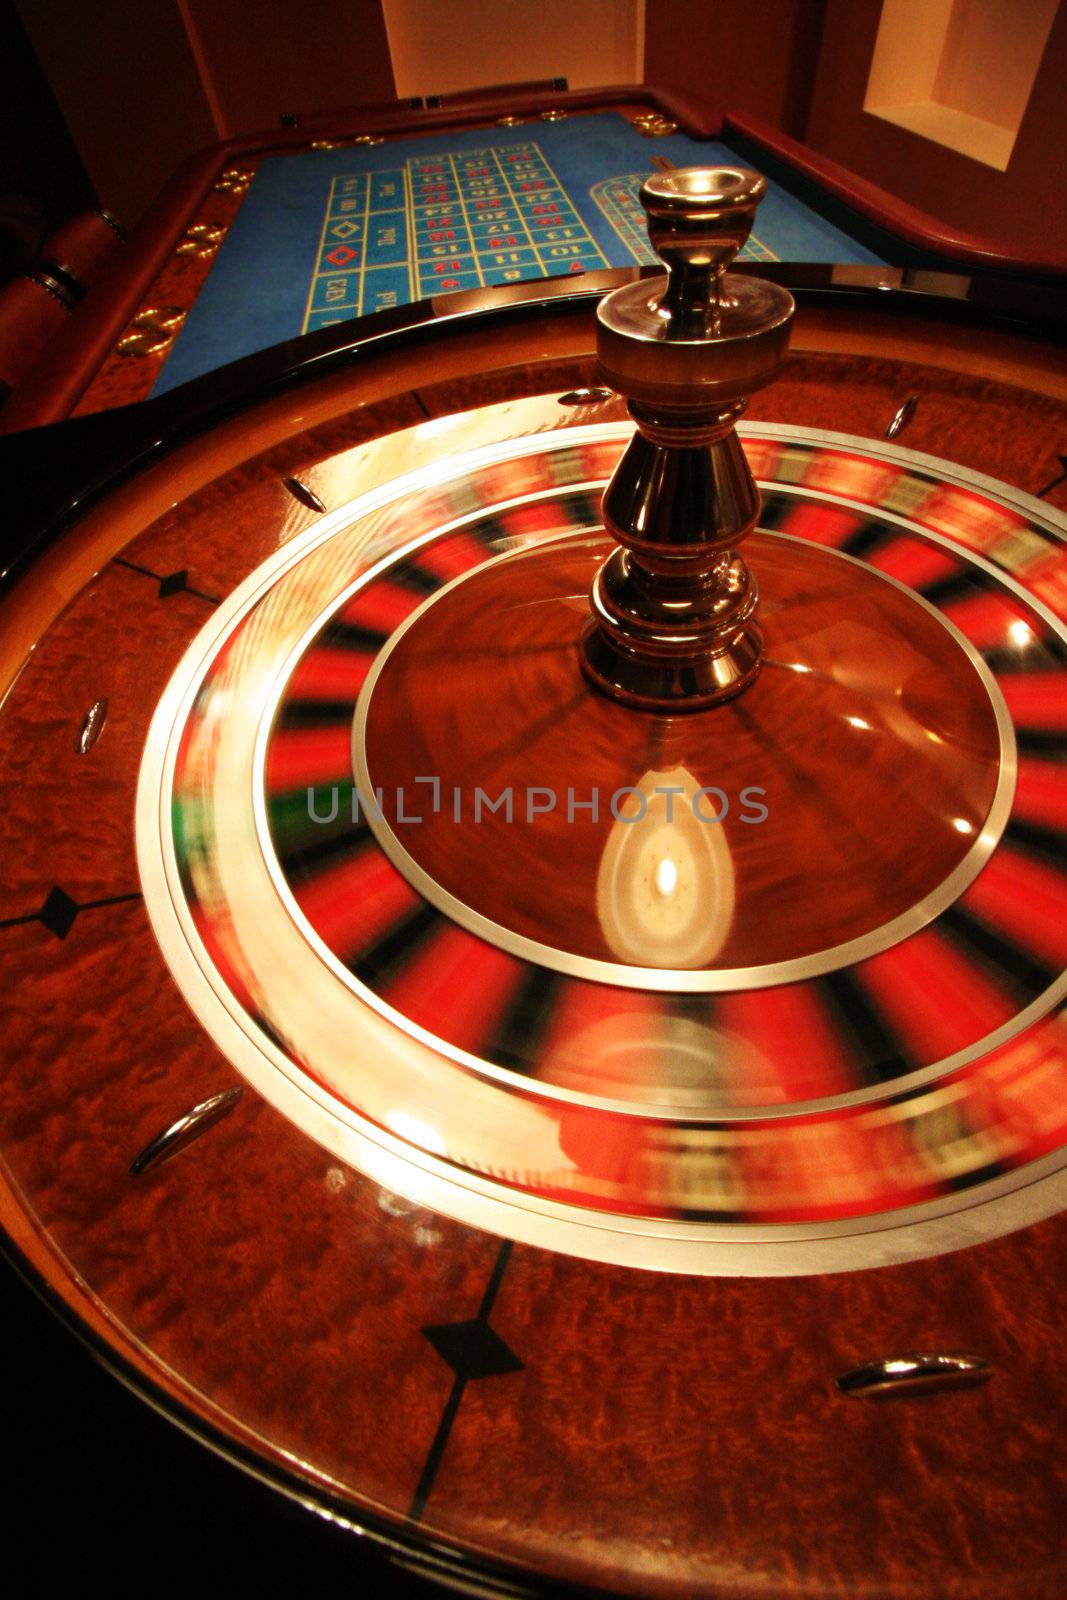 A turning roulette in a new casino